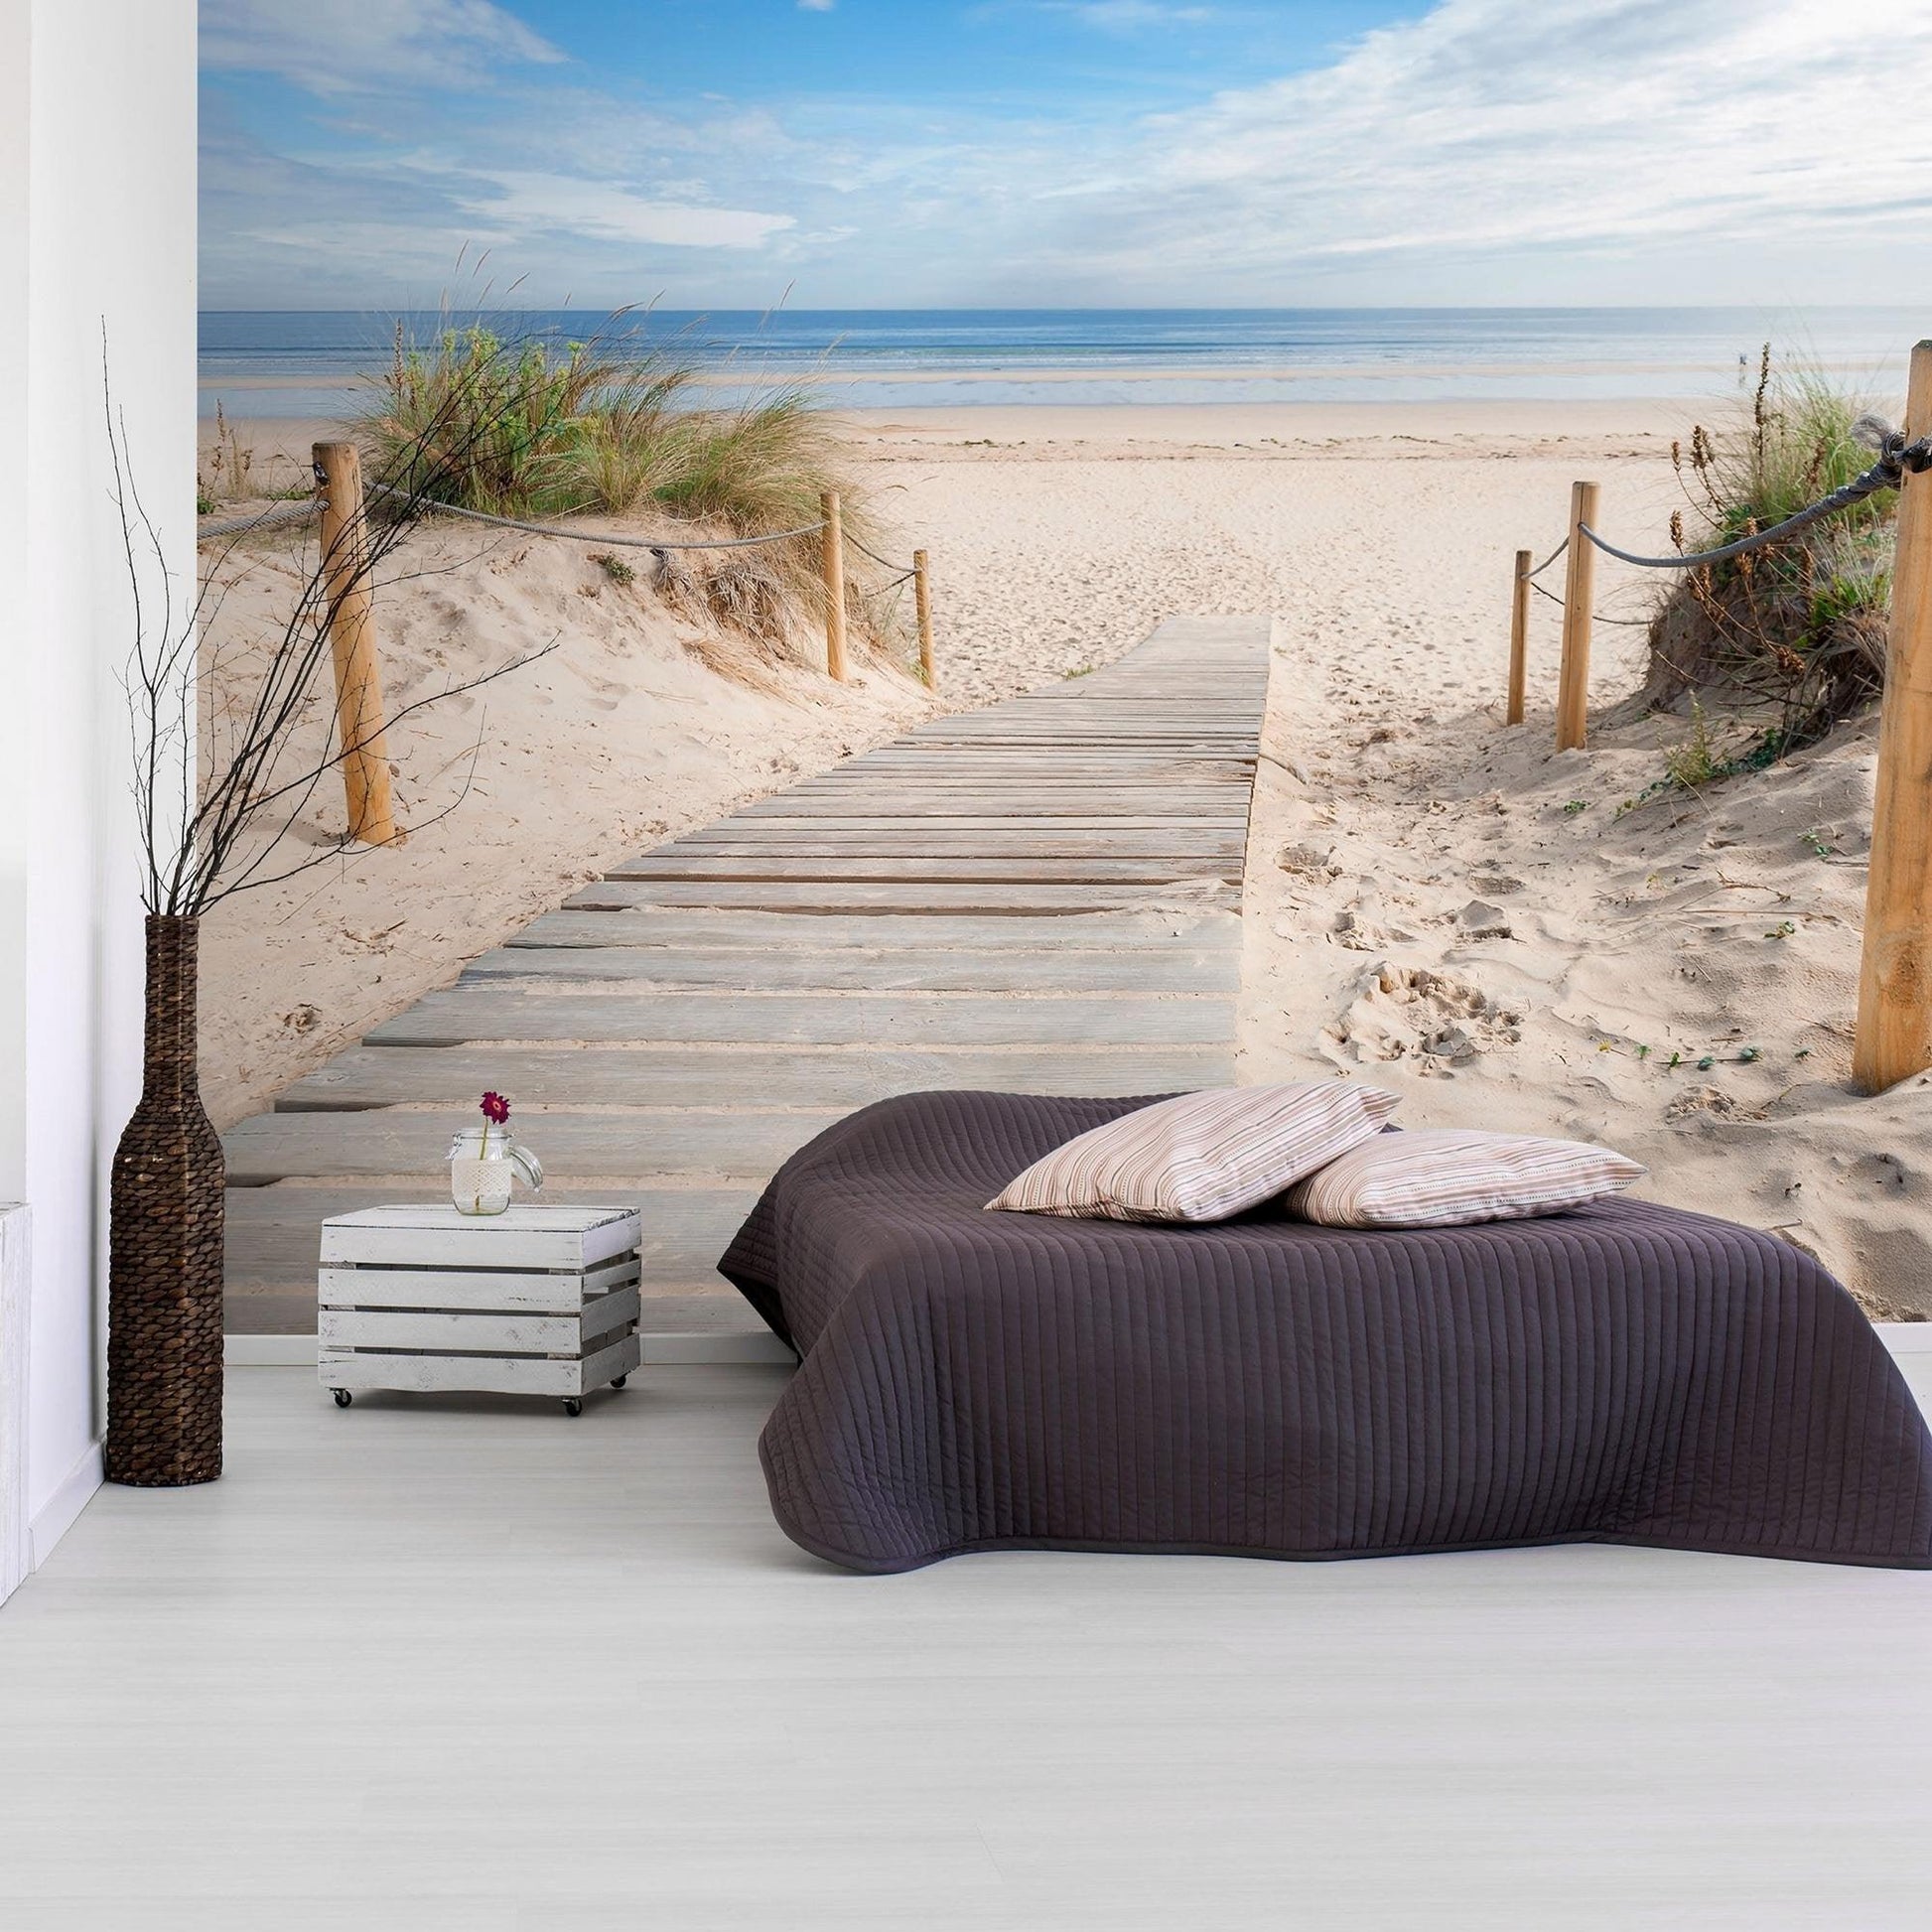 Peel and stick wall mural - On the beach - www.trendingbestsellers.com